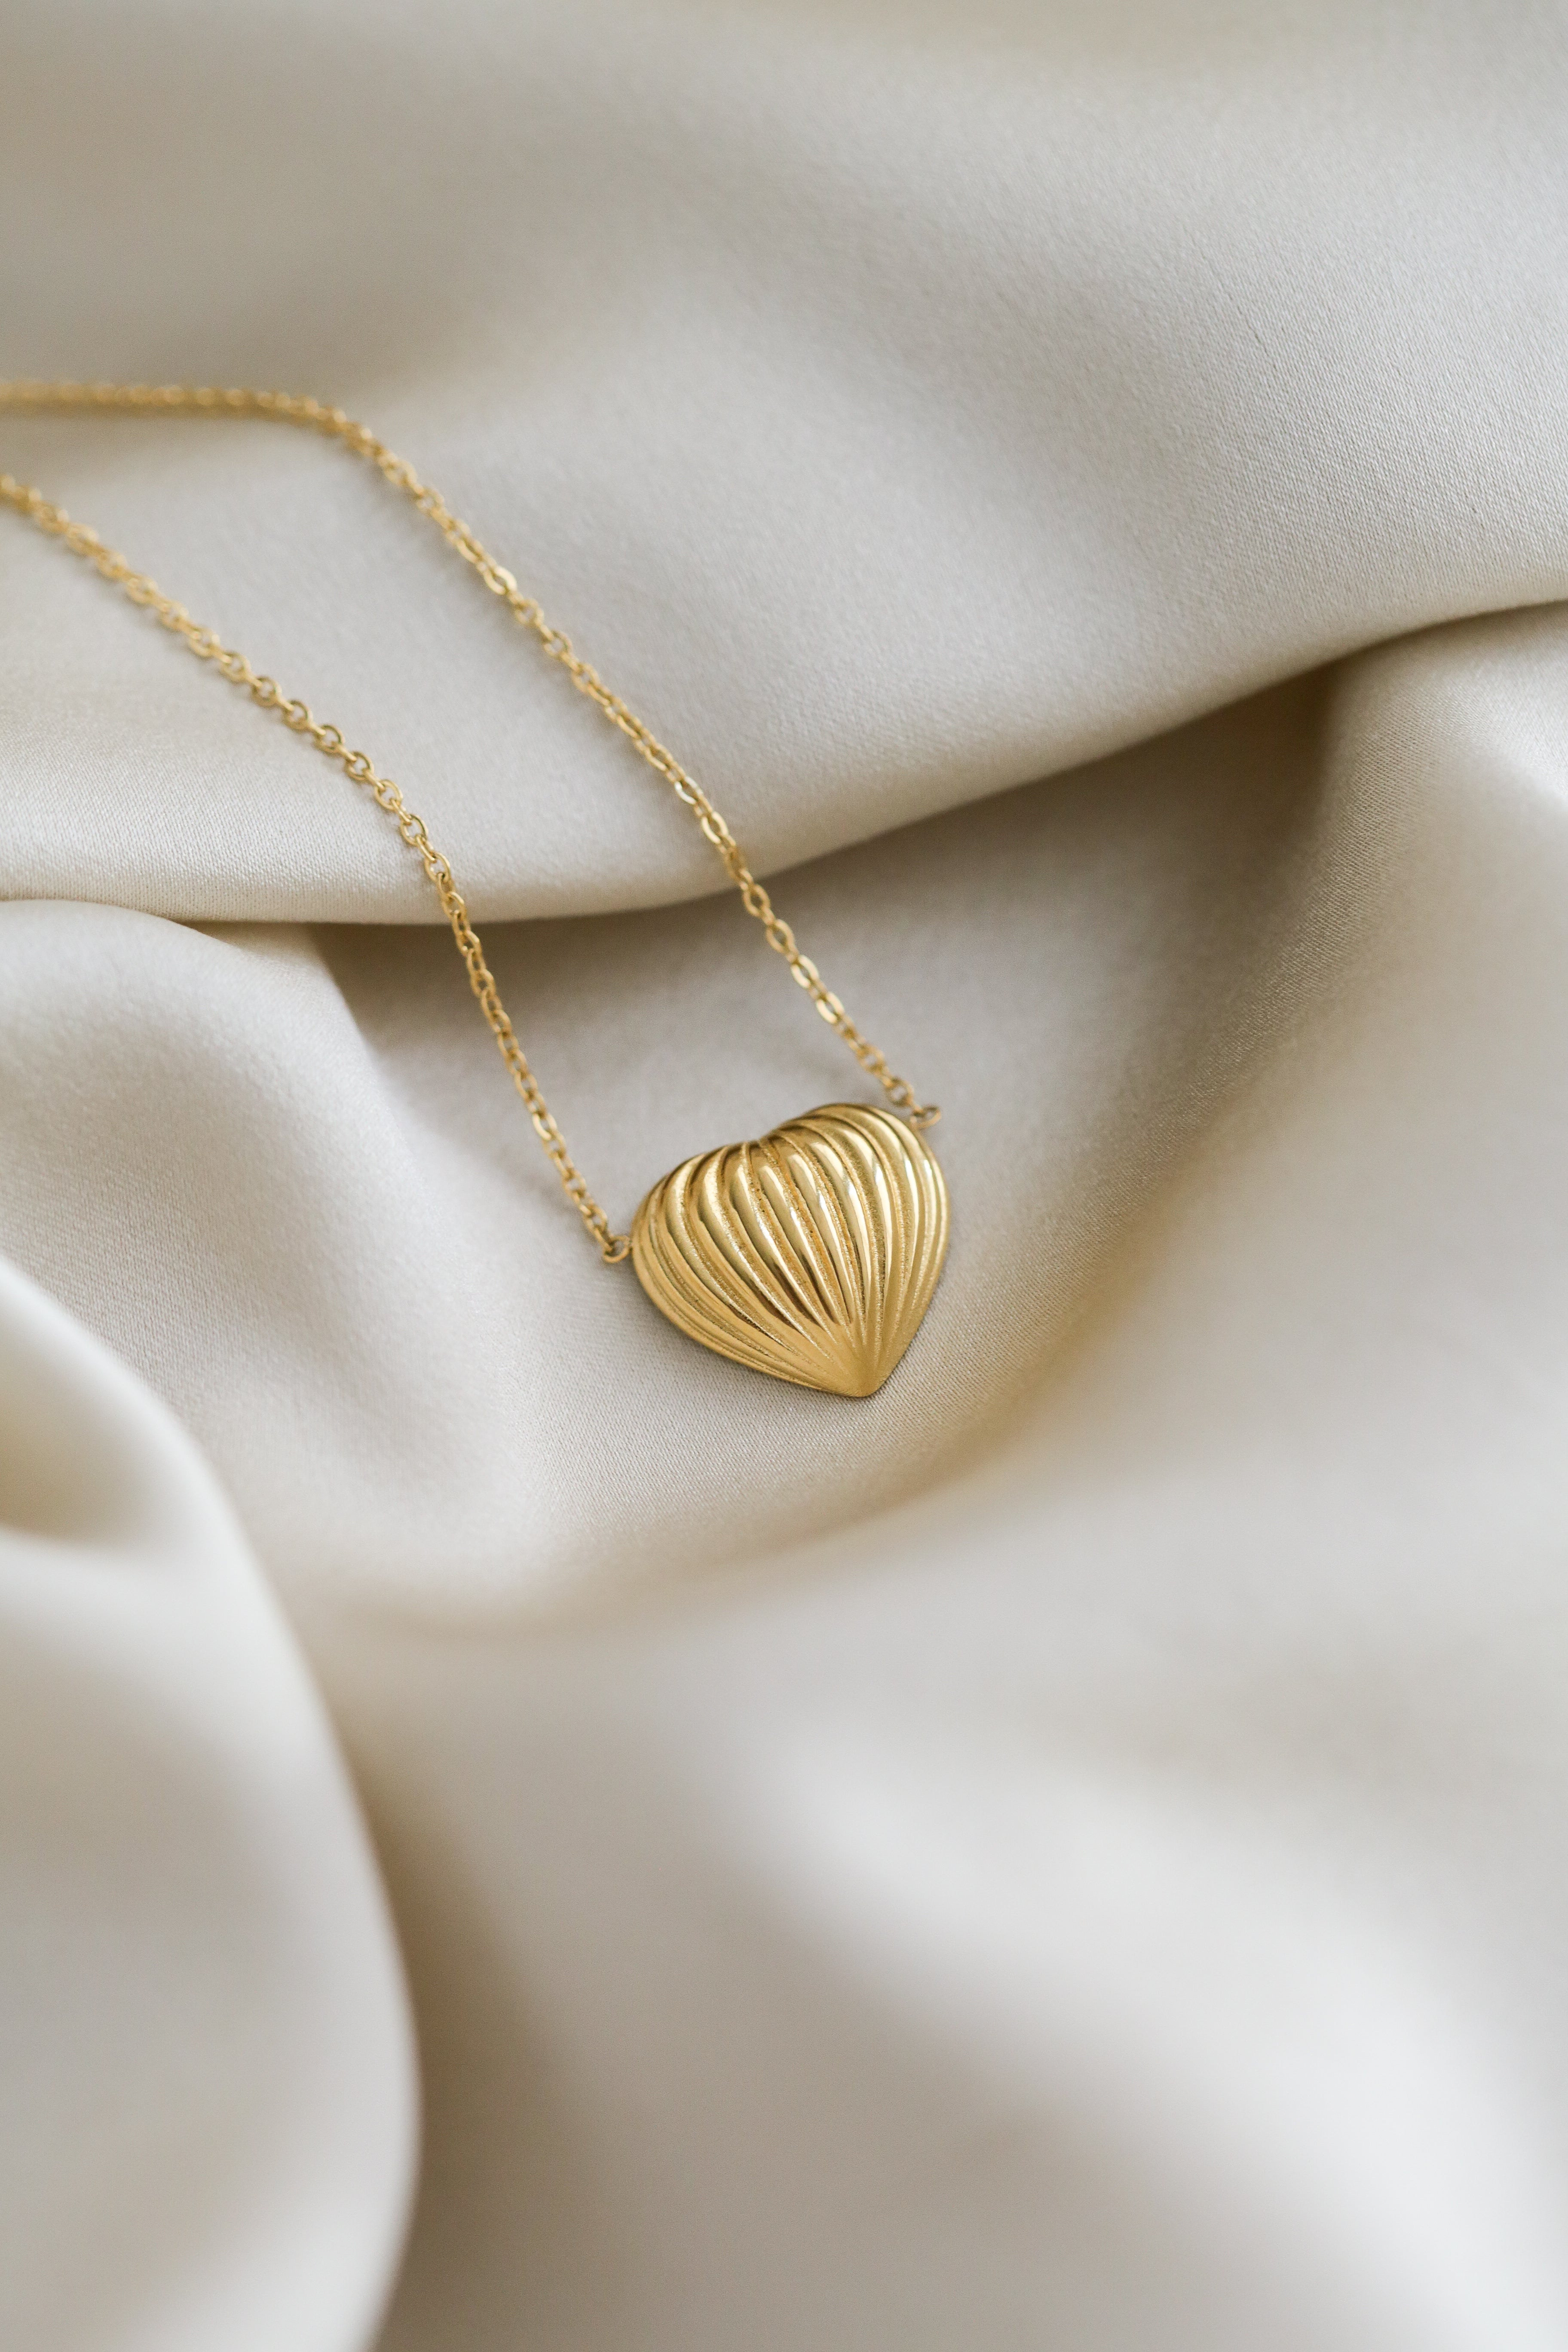 The Heart - Ribbed Pendant Necklace - Boutique Minimaliste has waterproof, durable, elegant and vintage inspired jewelry